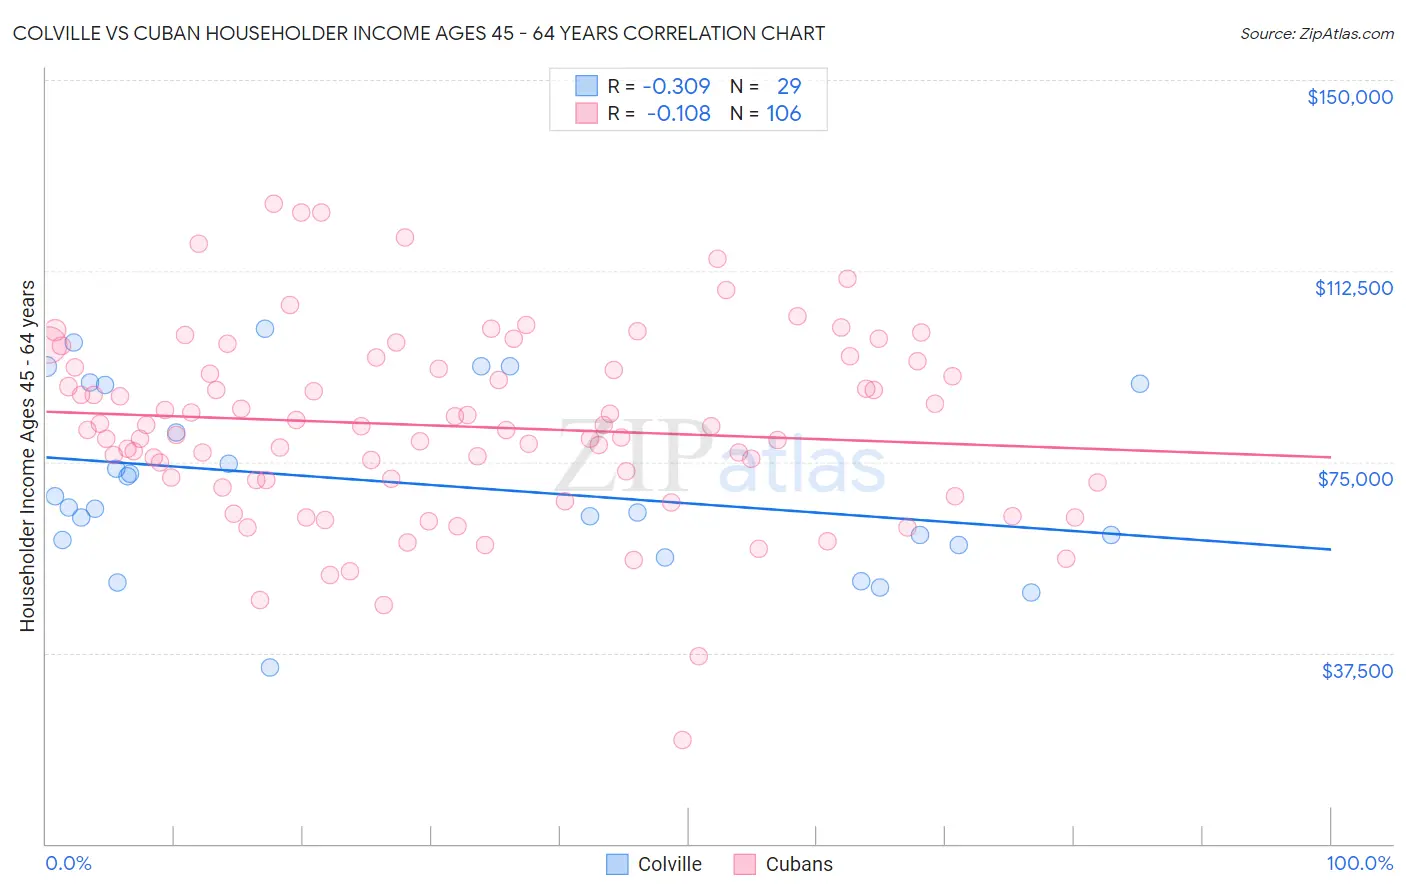 Colville vs Cuban Householder Income Ages 45 - 64 years